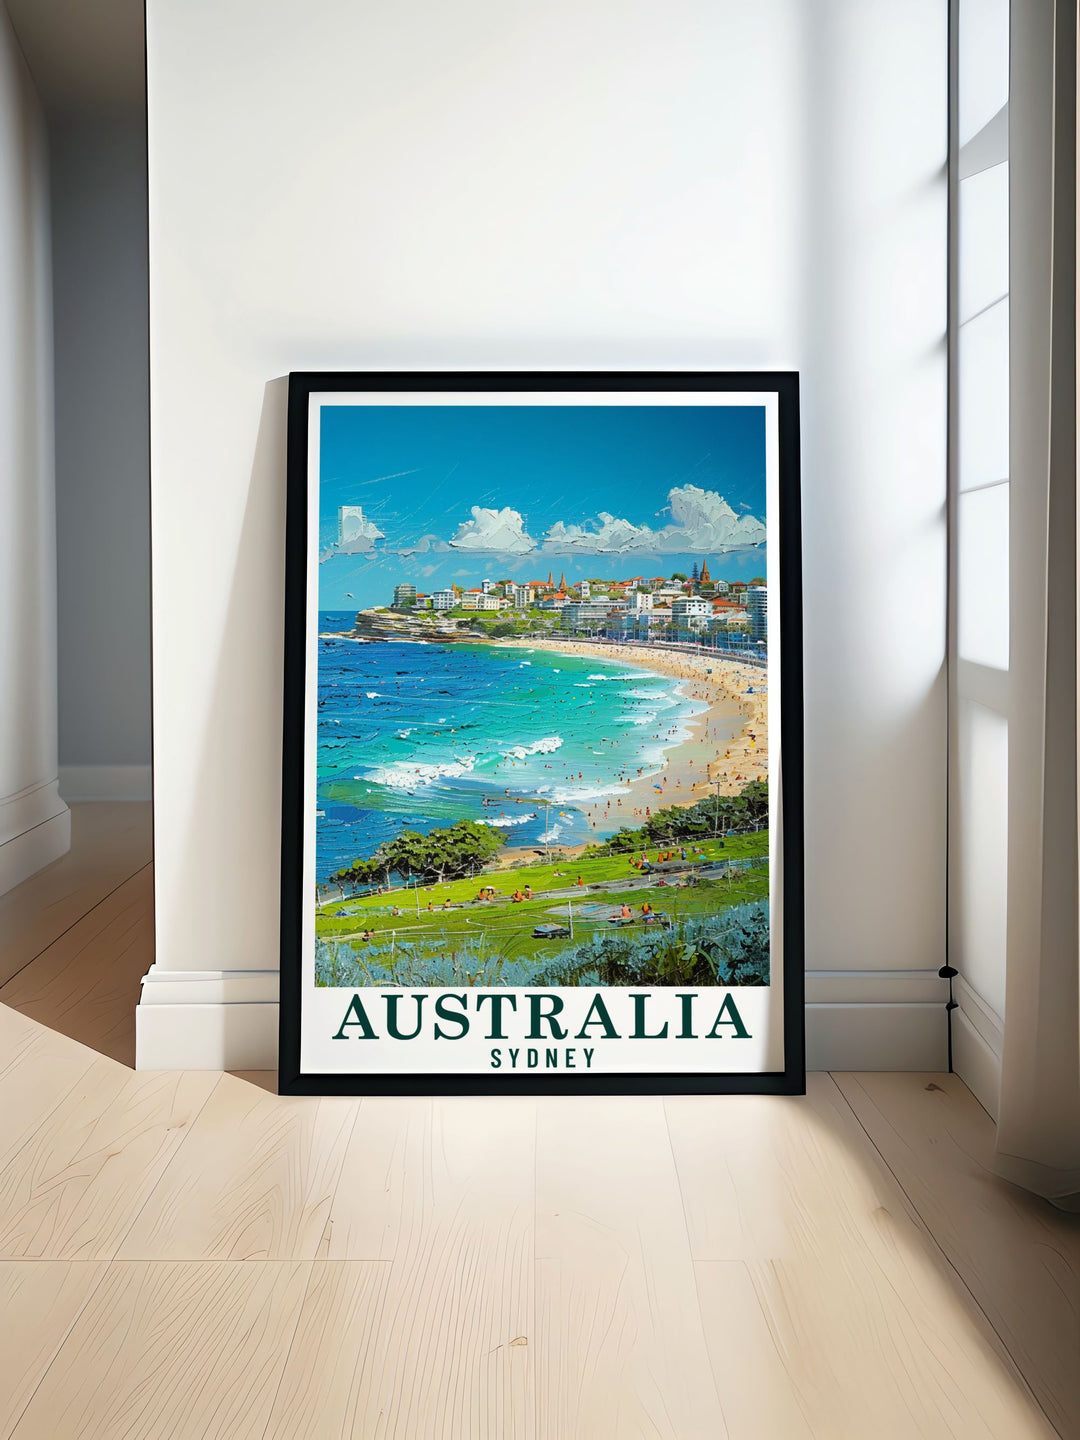 The iconic Bondi Beach, with its bustling boardwalk and azure waters, is captured in this detailed illustration, offering a glimpse into Sydneys vibrant beach culture.